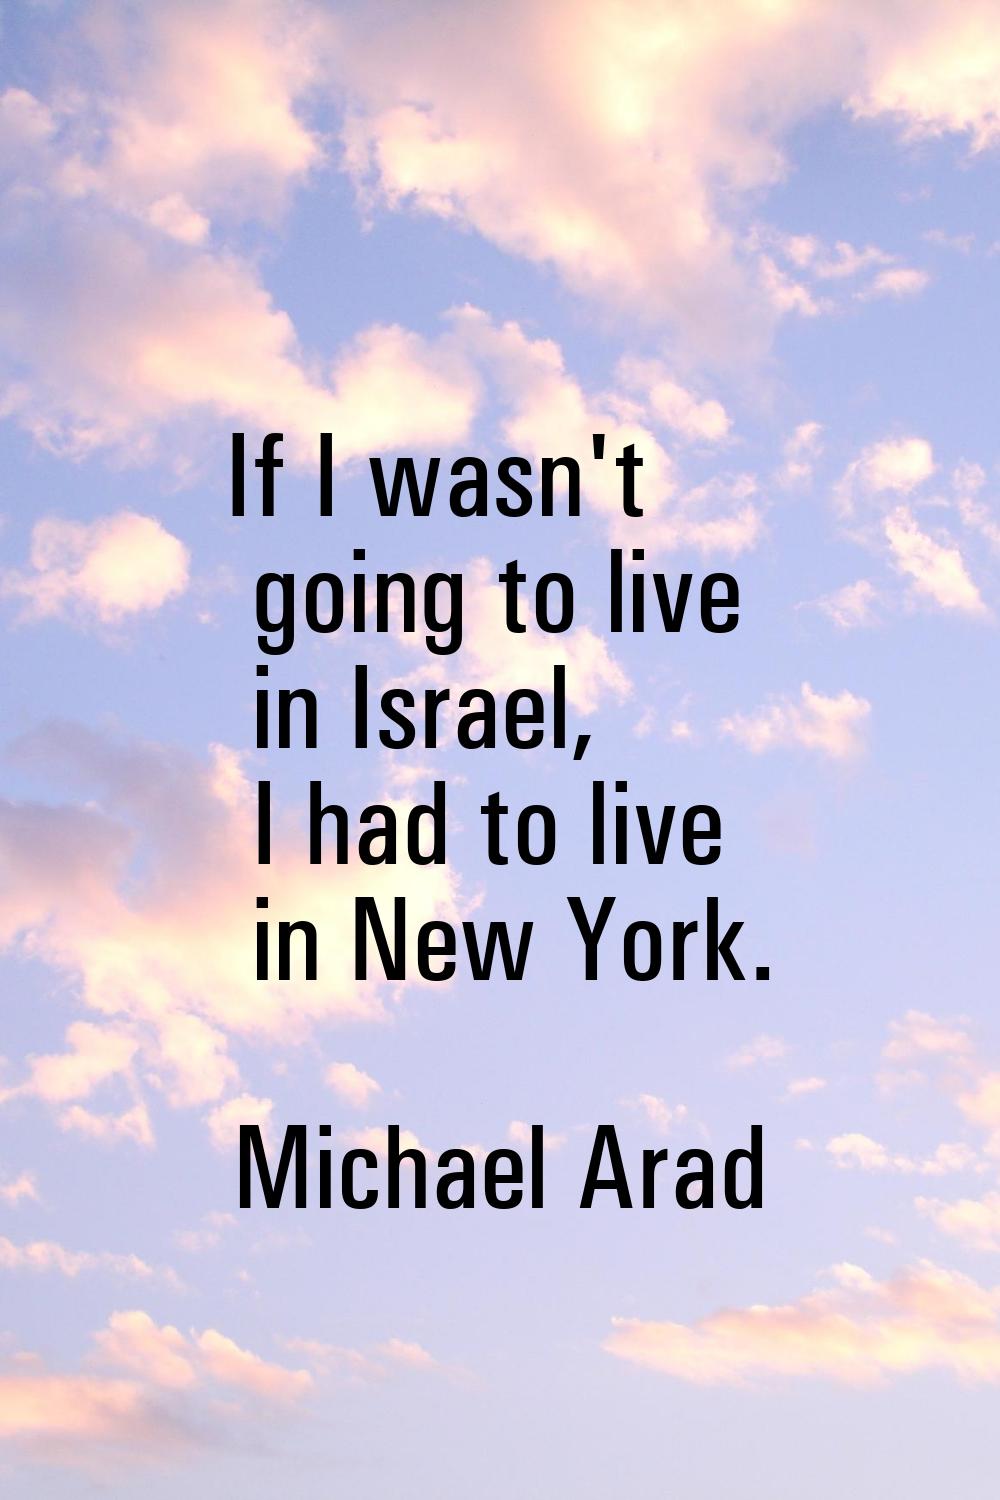 If I wasn't going to live in Israel, I had to live in New York.